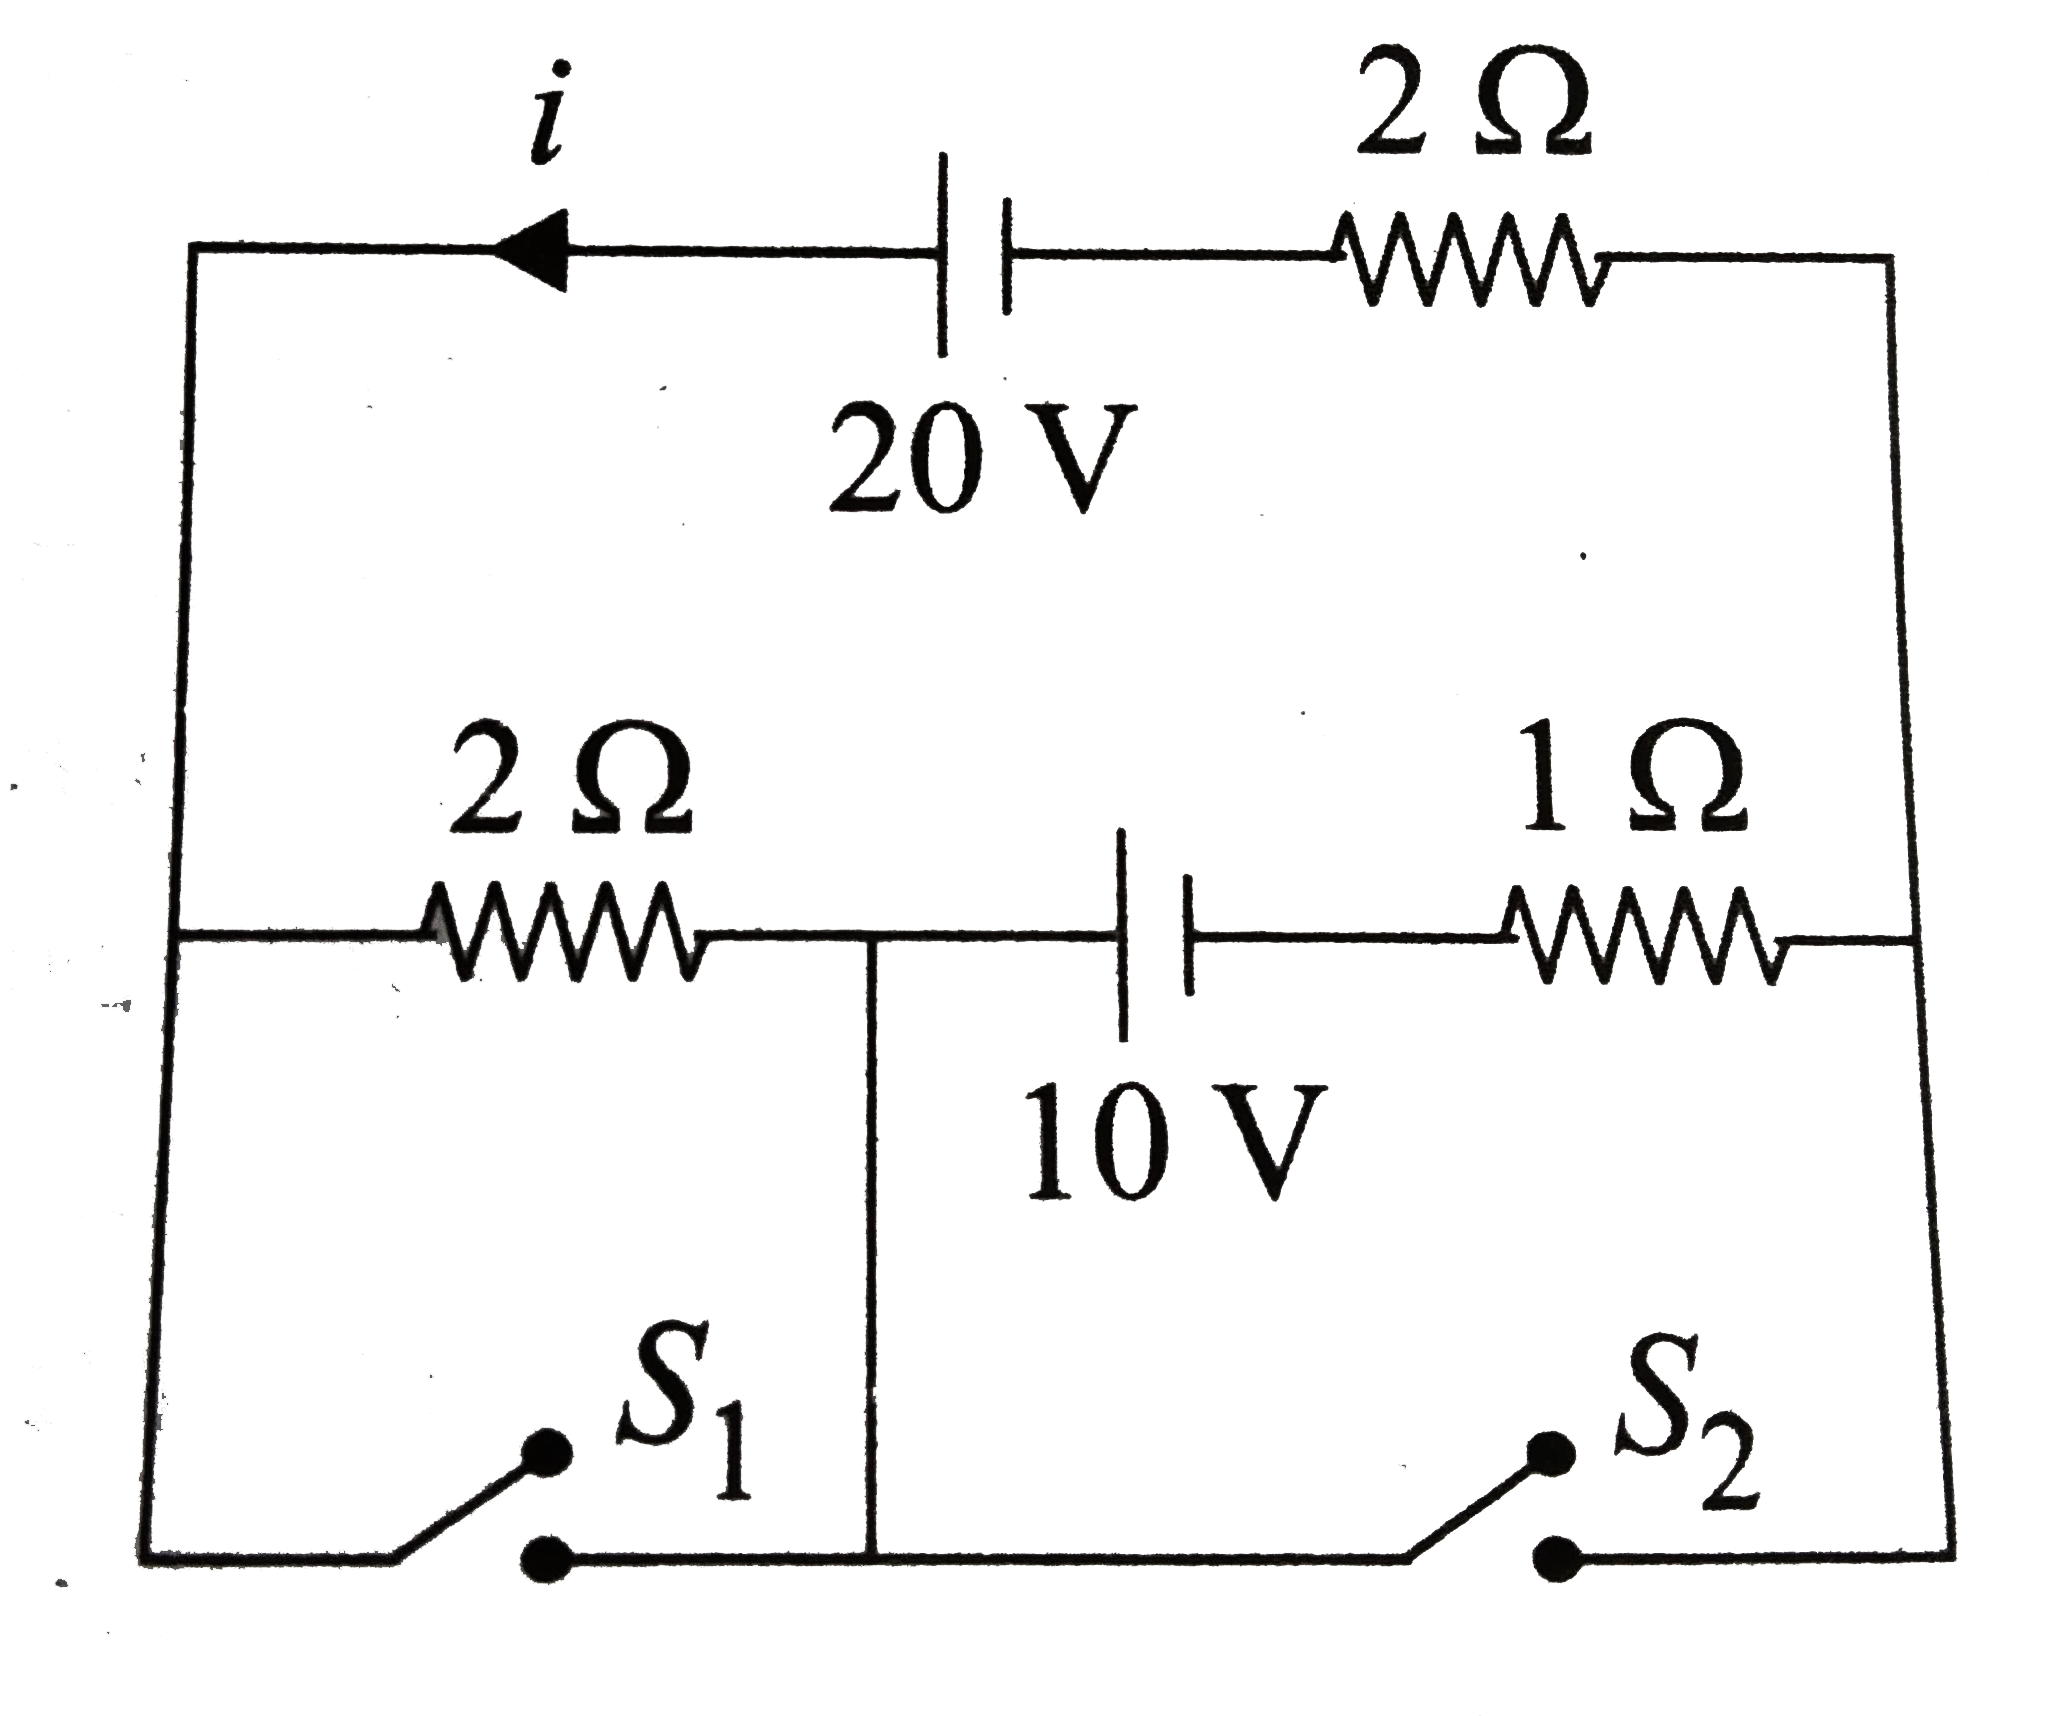 In the circuit shown in figure,